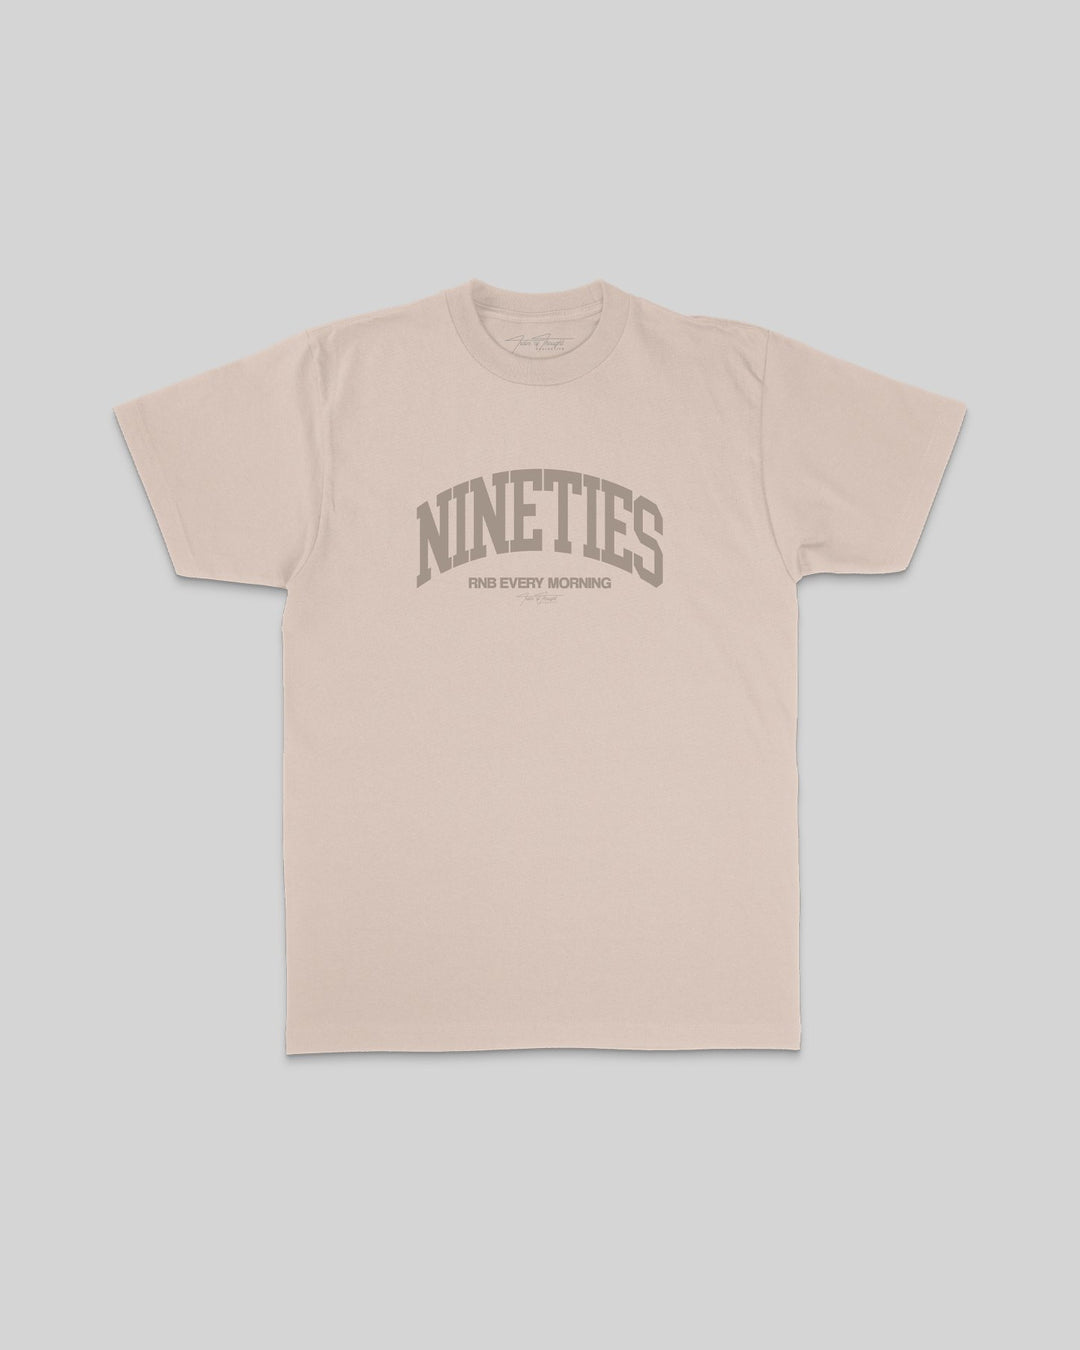 Nineties Rnb Every Morning Arch Sand Tee - trainofthoughtcollective